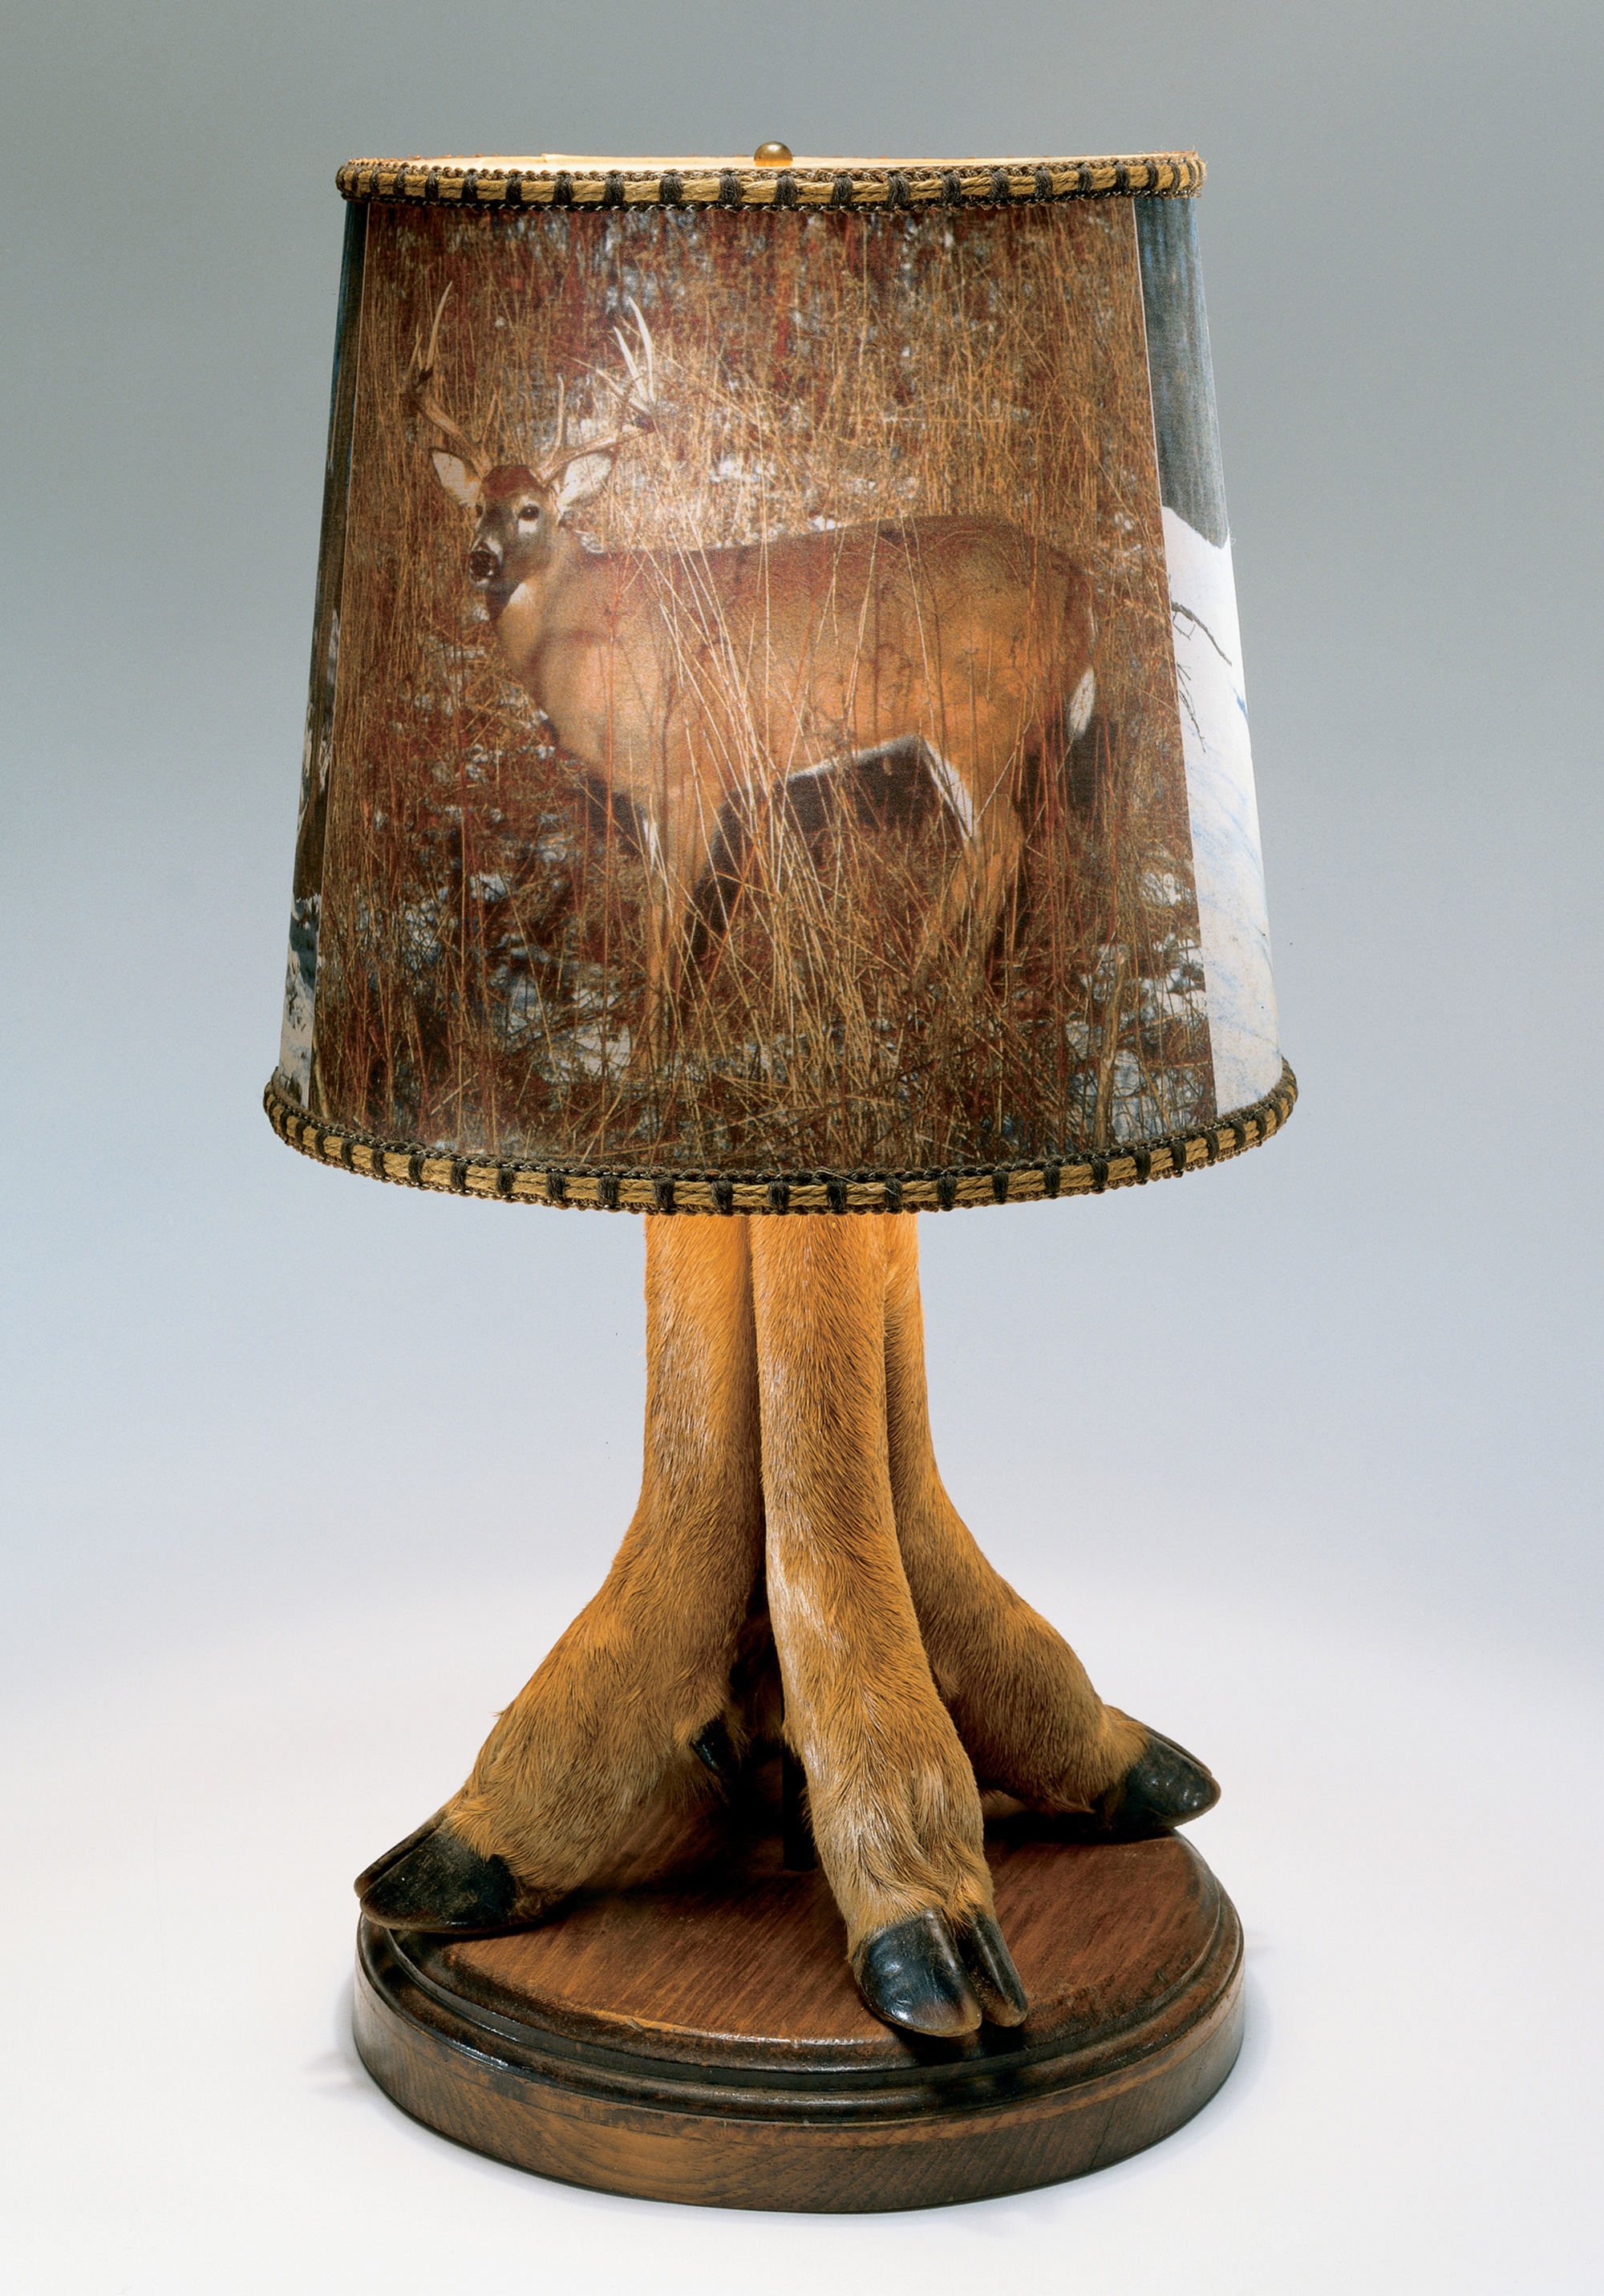 A photograph of a trophy lamp with deer forelegs as base, circa 1970.